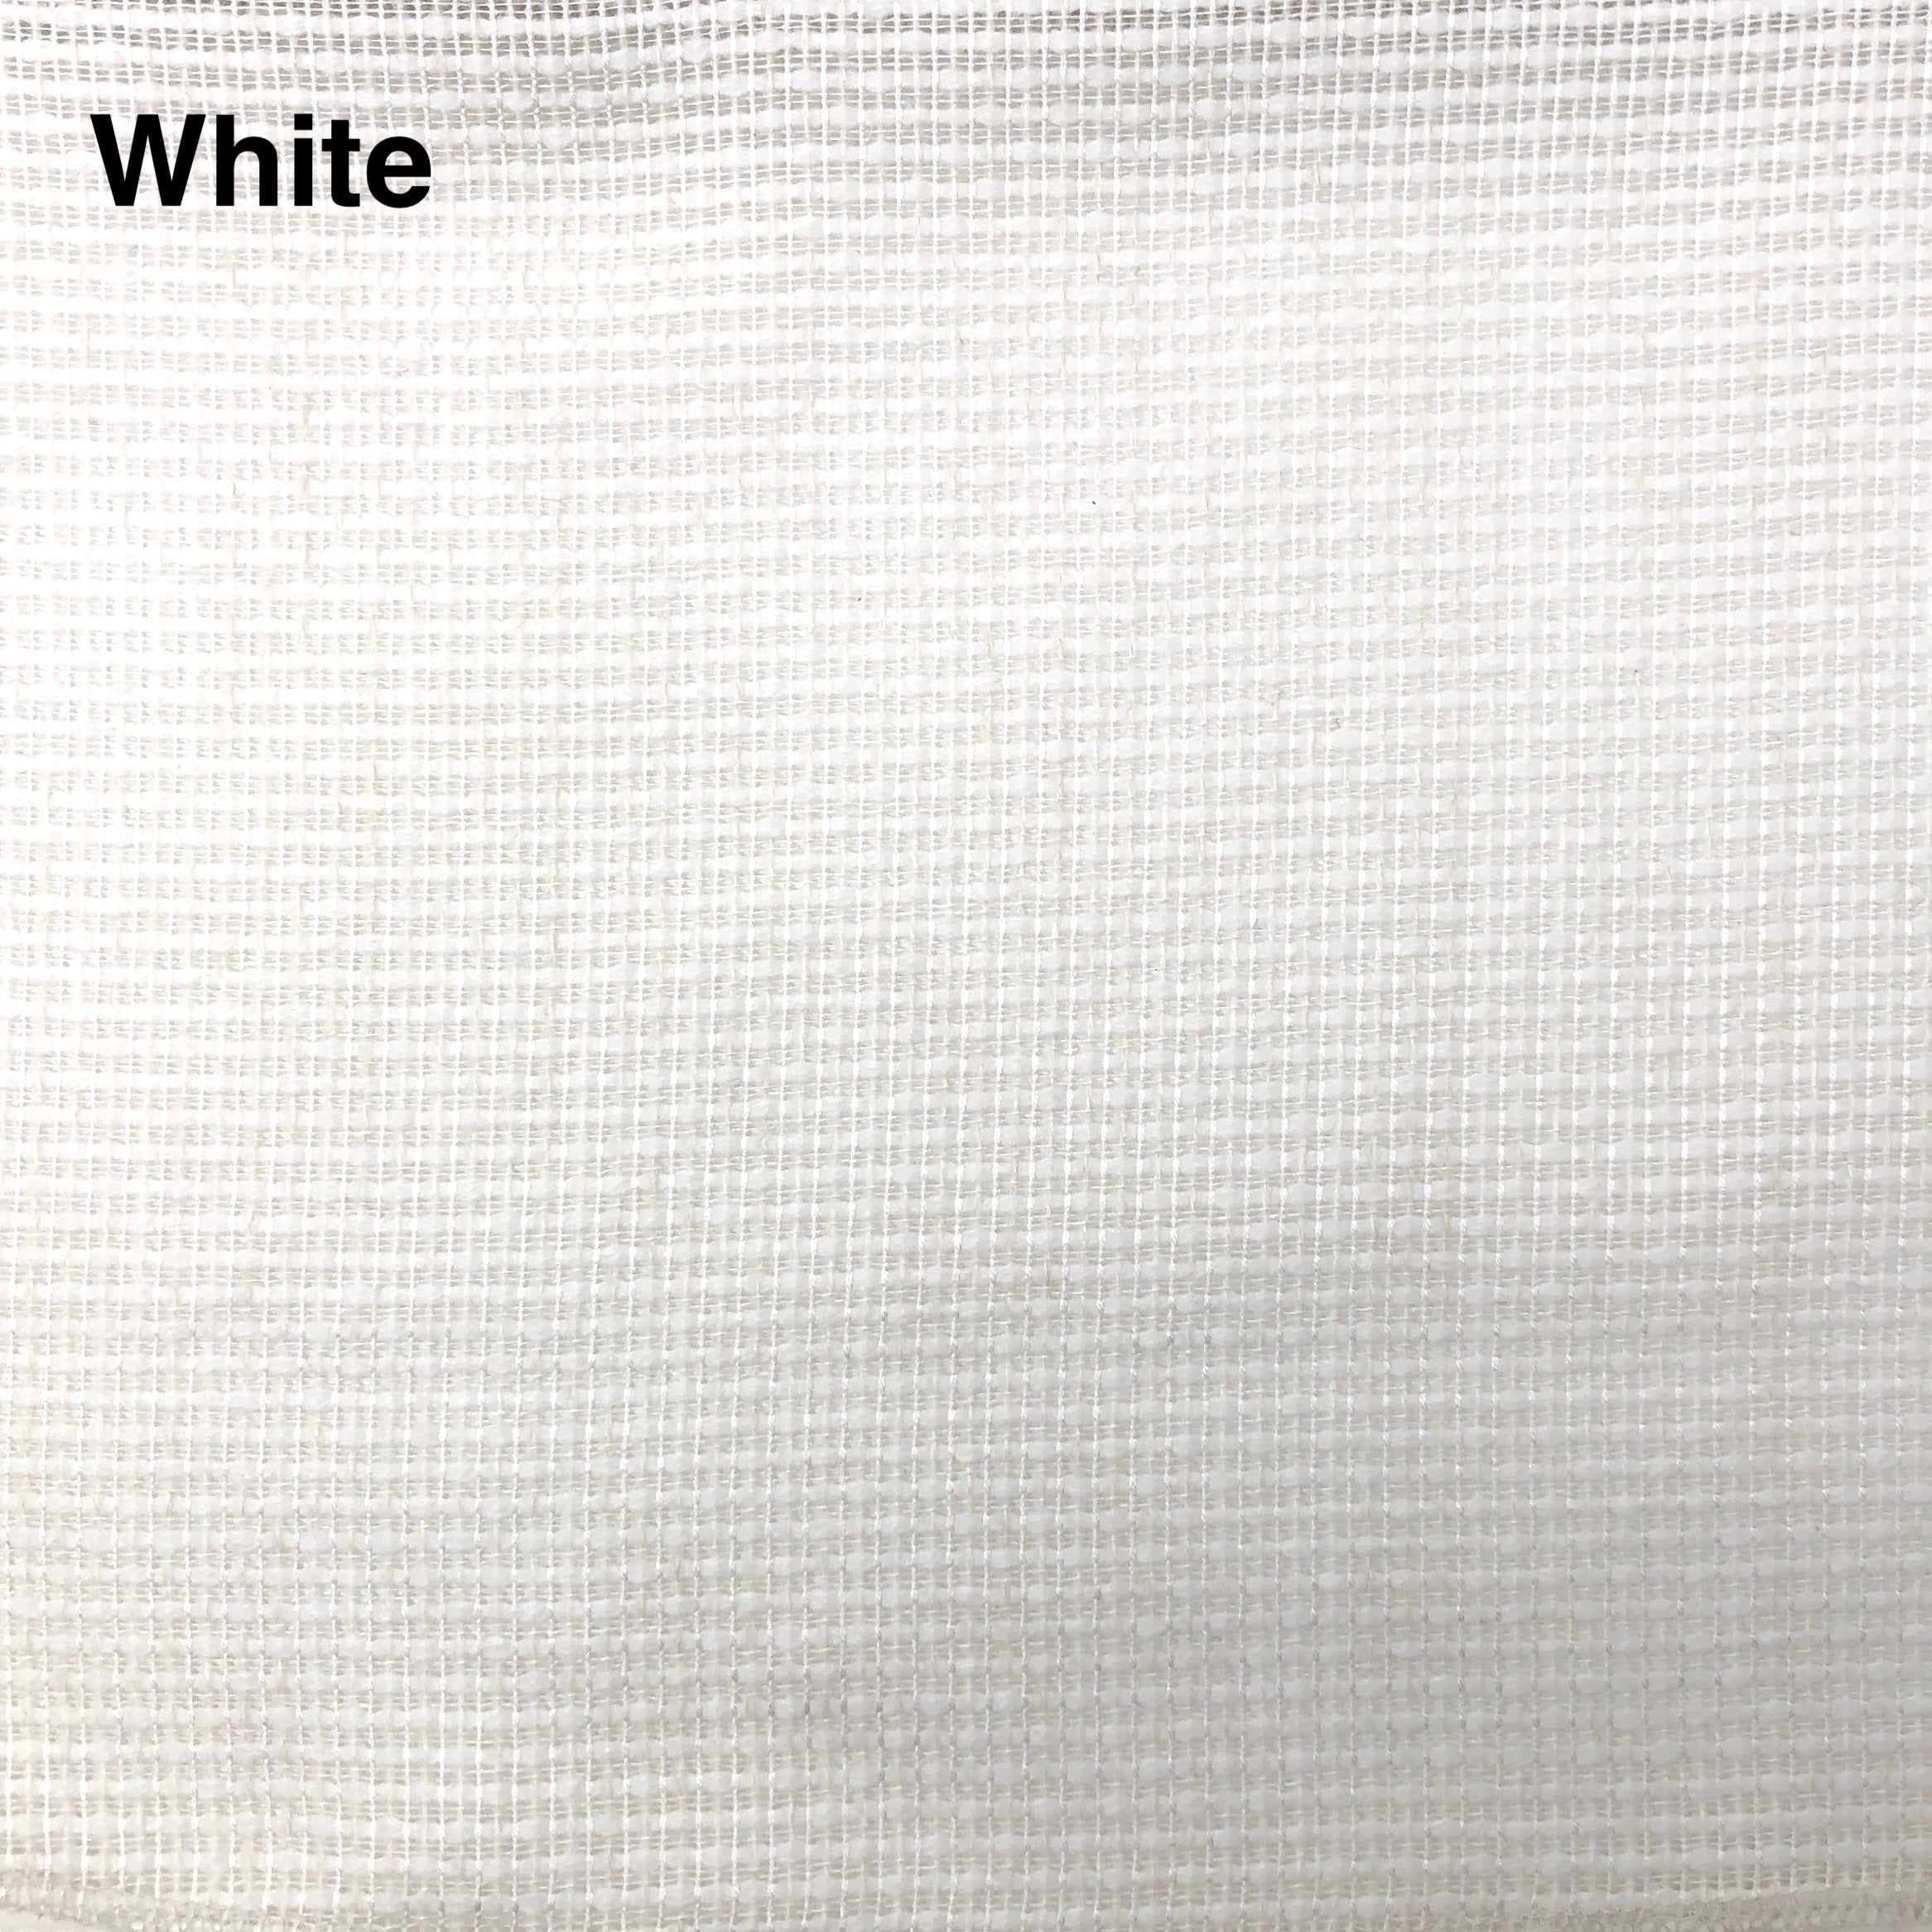 Linen Blend Net Sheer Fabric By The Yard, White, Ivory, Oatmeal, Curtain, Drapery, Table Top, 60" Width/CL1029